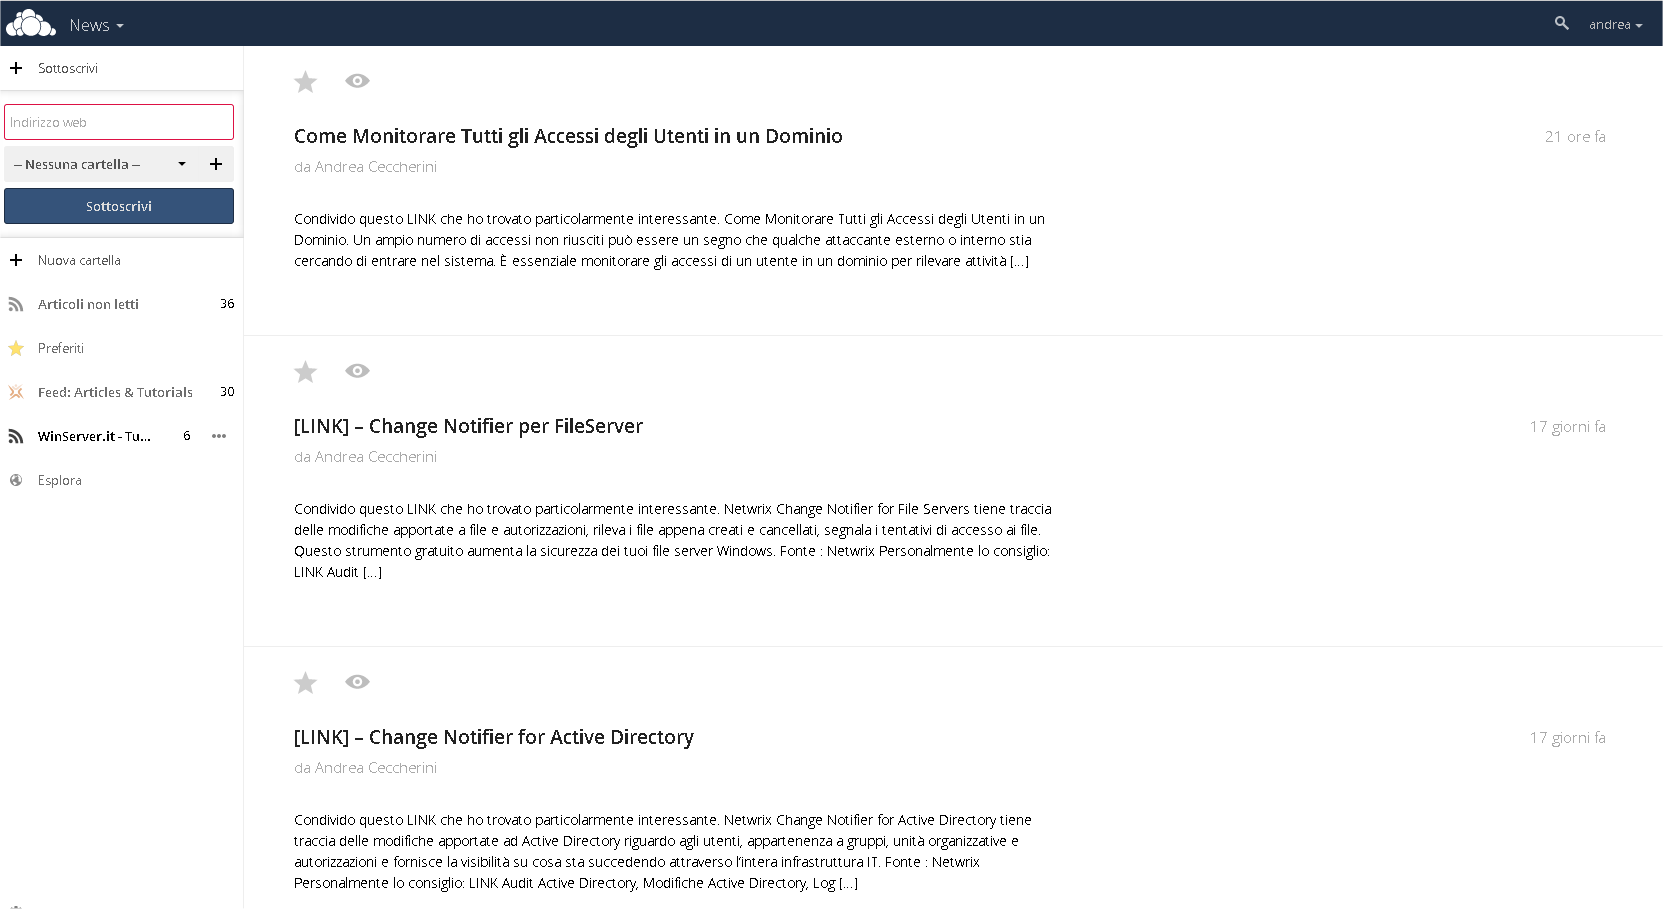 Owncloud Feedly